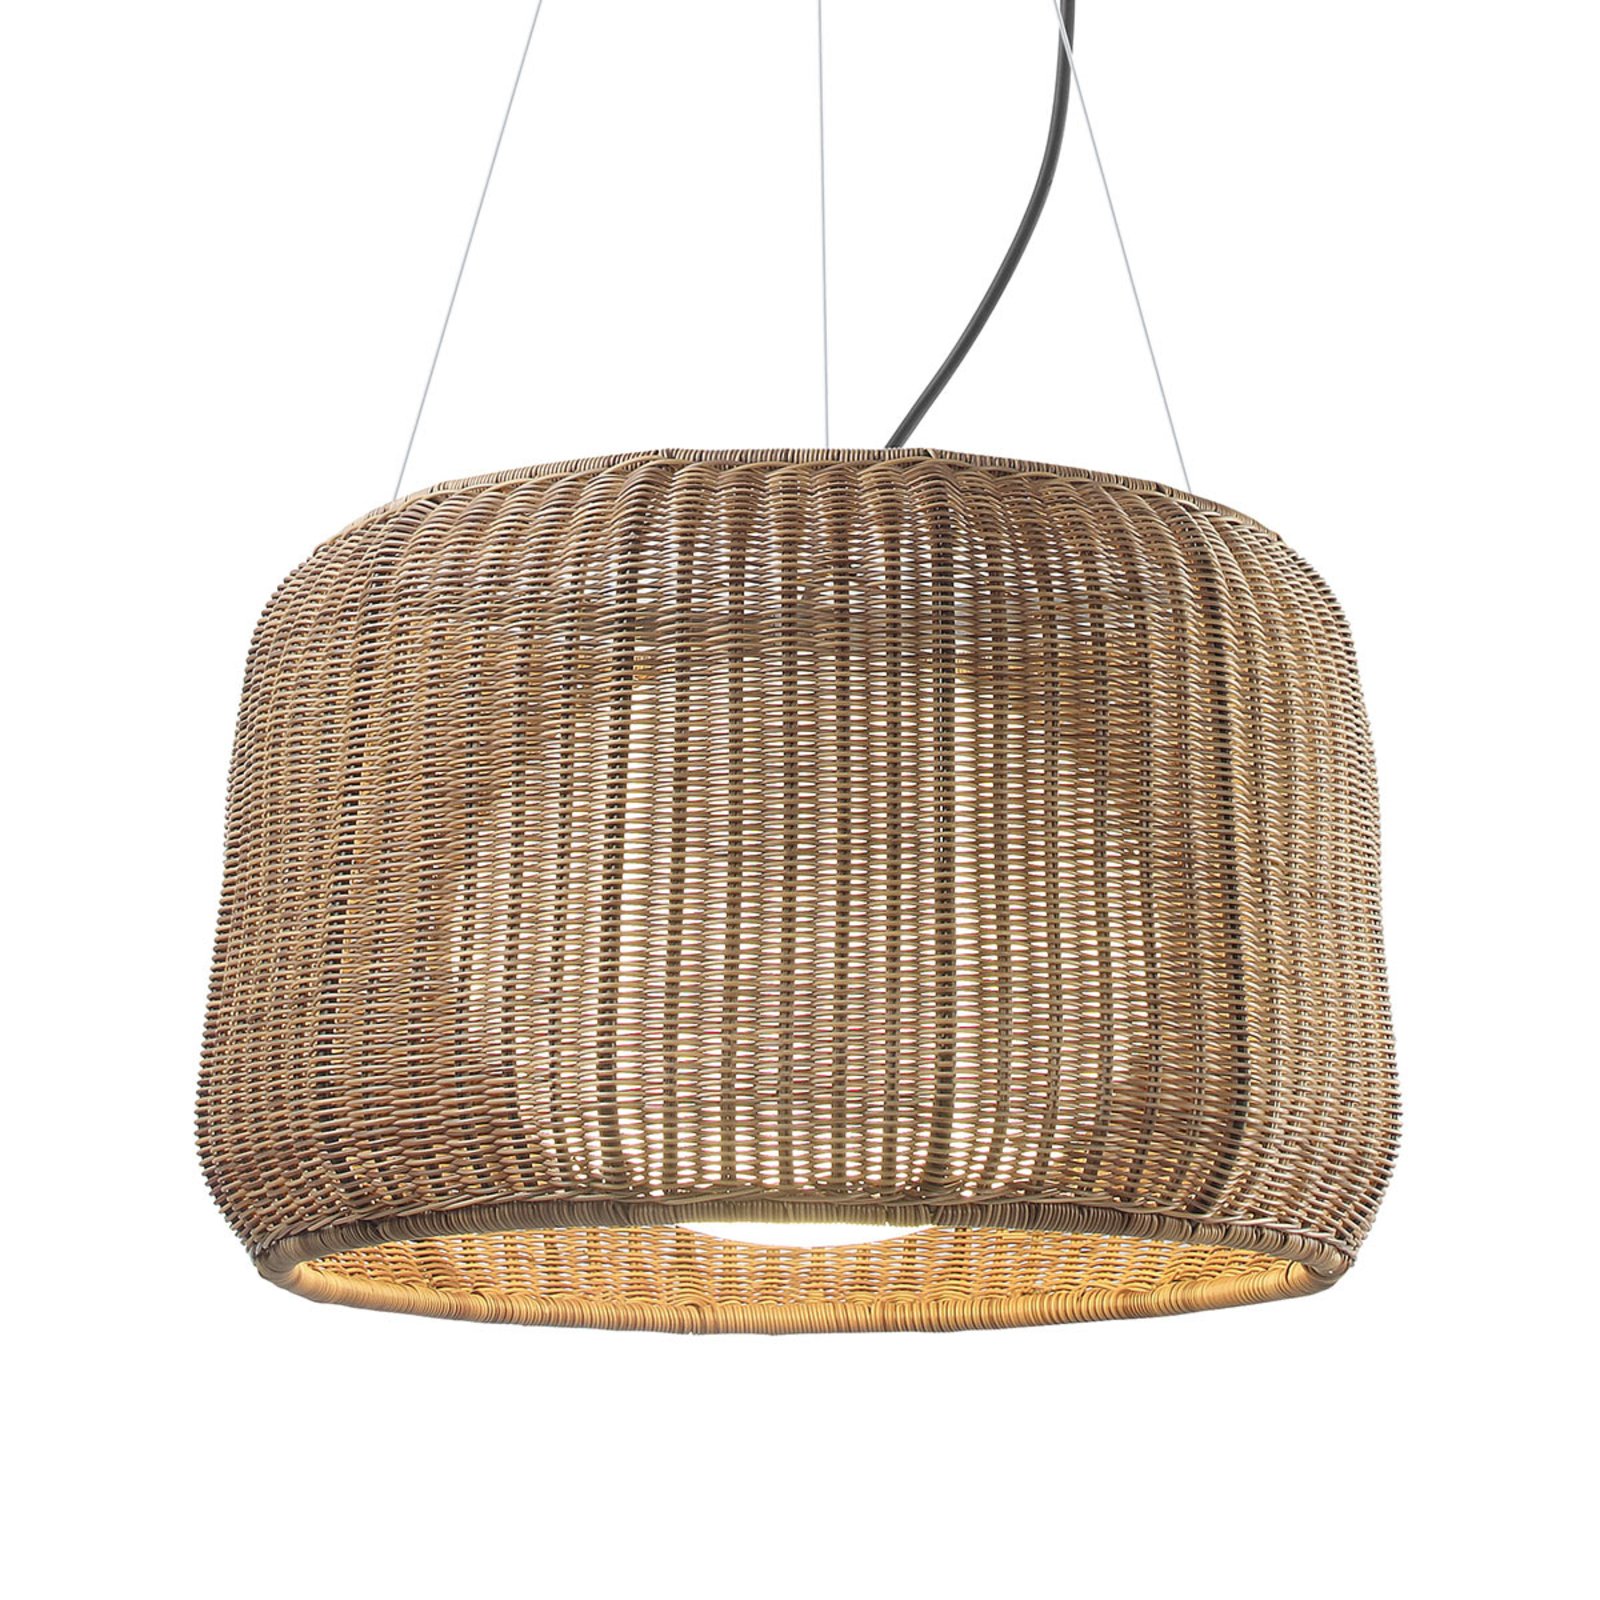 Bover Fora S outdoor hanging light, graphite brown